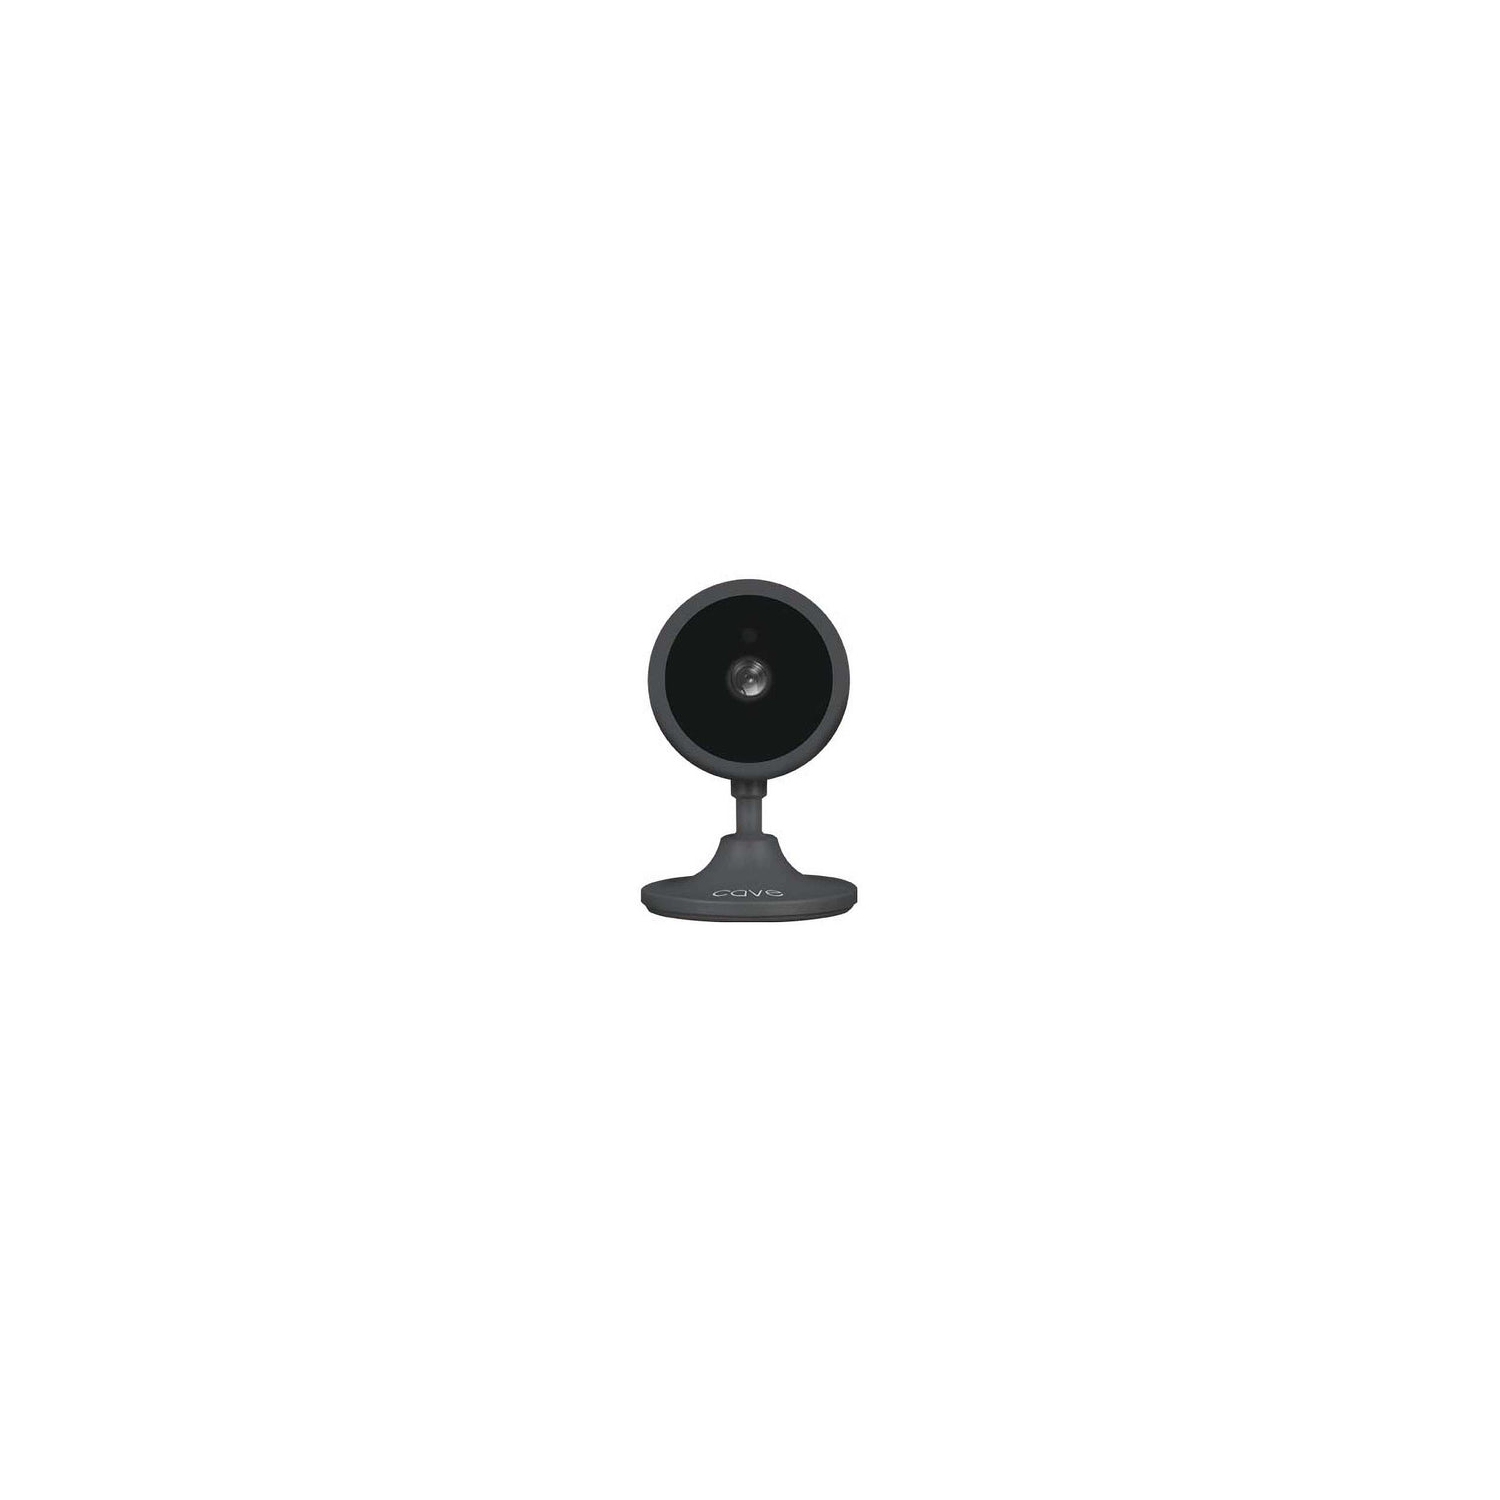 Veho Cave 1080P Full HD IP Camera with Motion Detection, Night Vision, & Smart Home Security - Grey